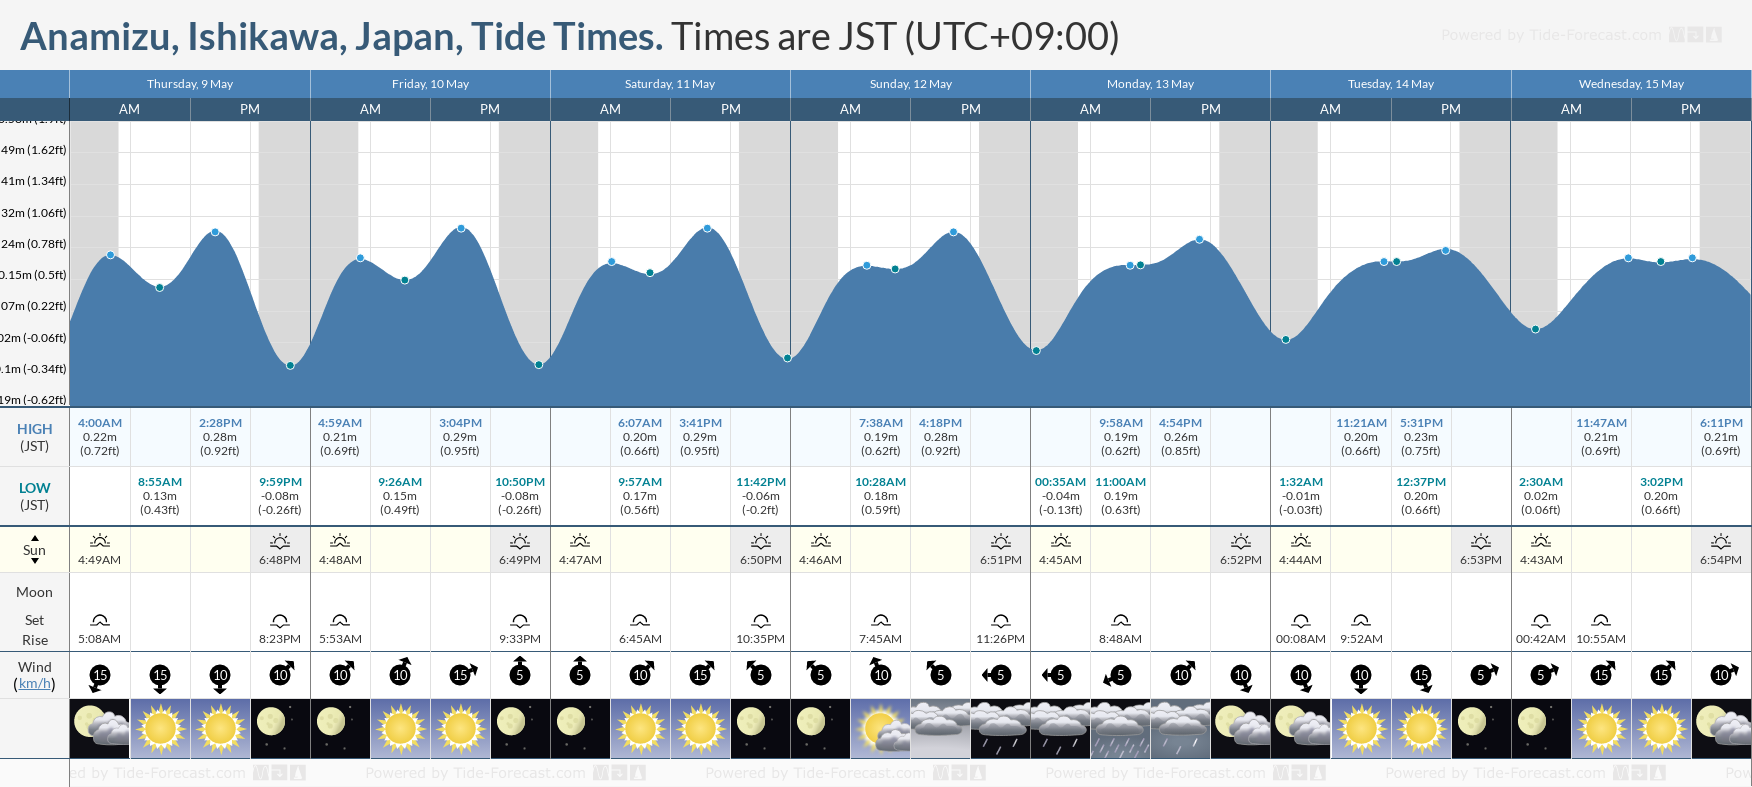 Anamizu, Ishikawa, Japan Tide Chart including high and low tide tide times for the next 7 days